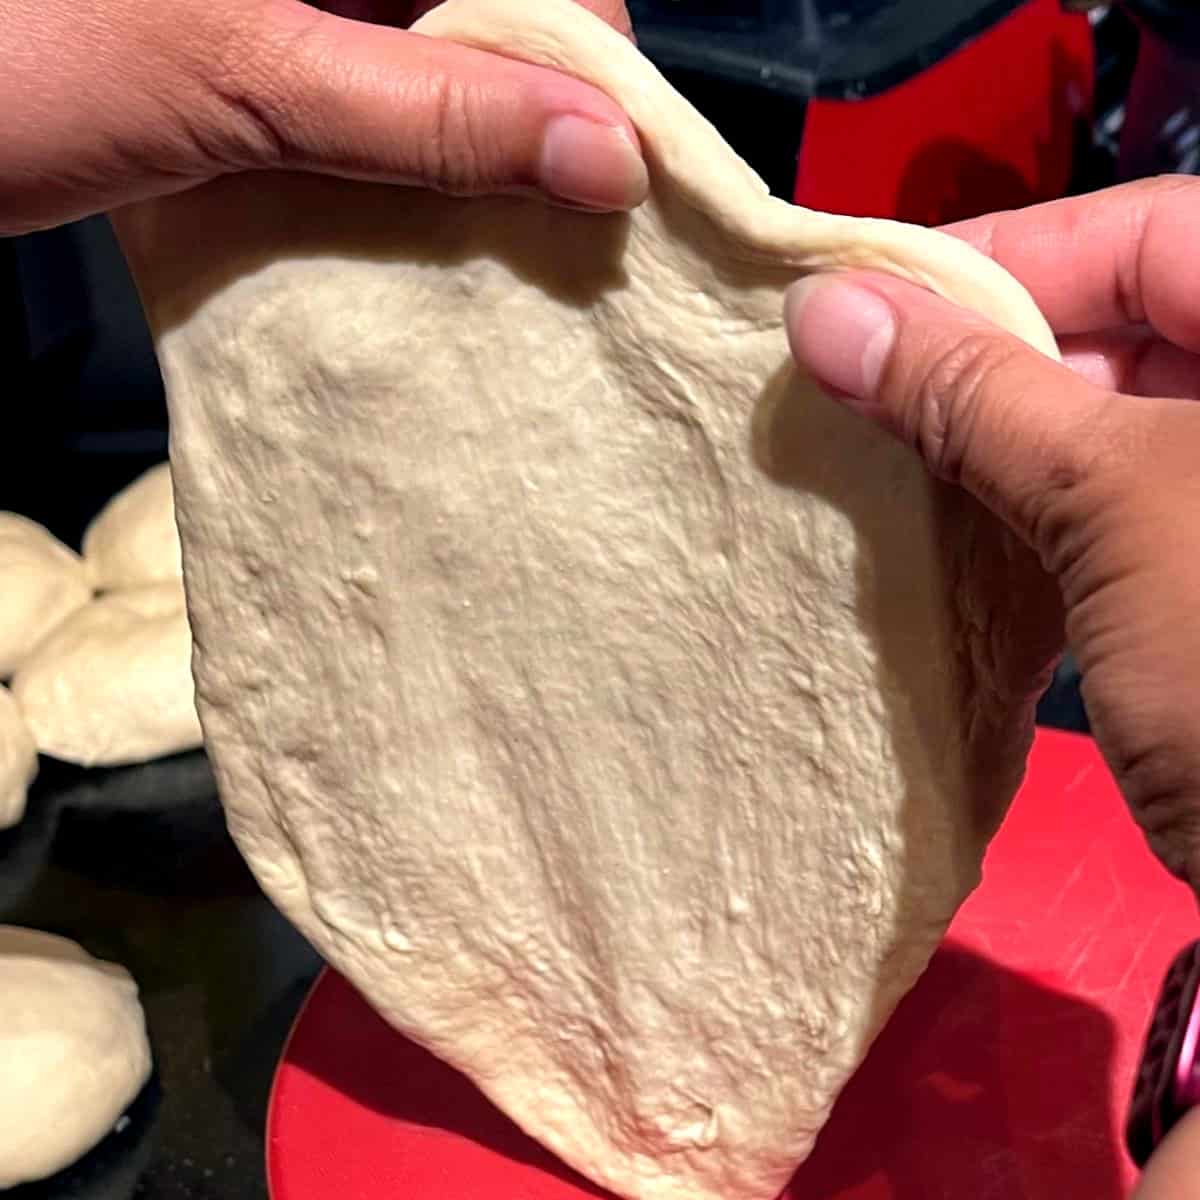 Shaping vegan naan with fingers.